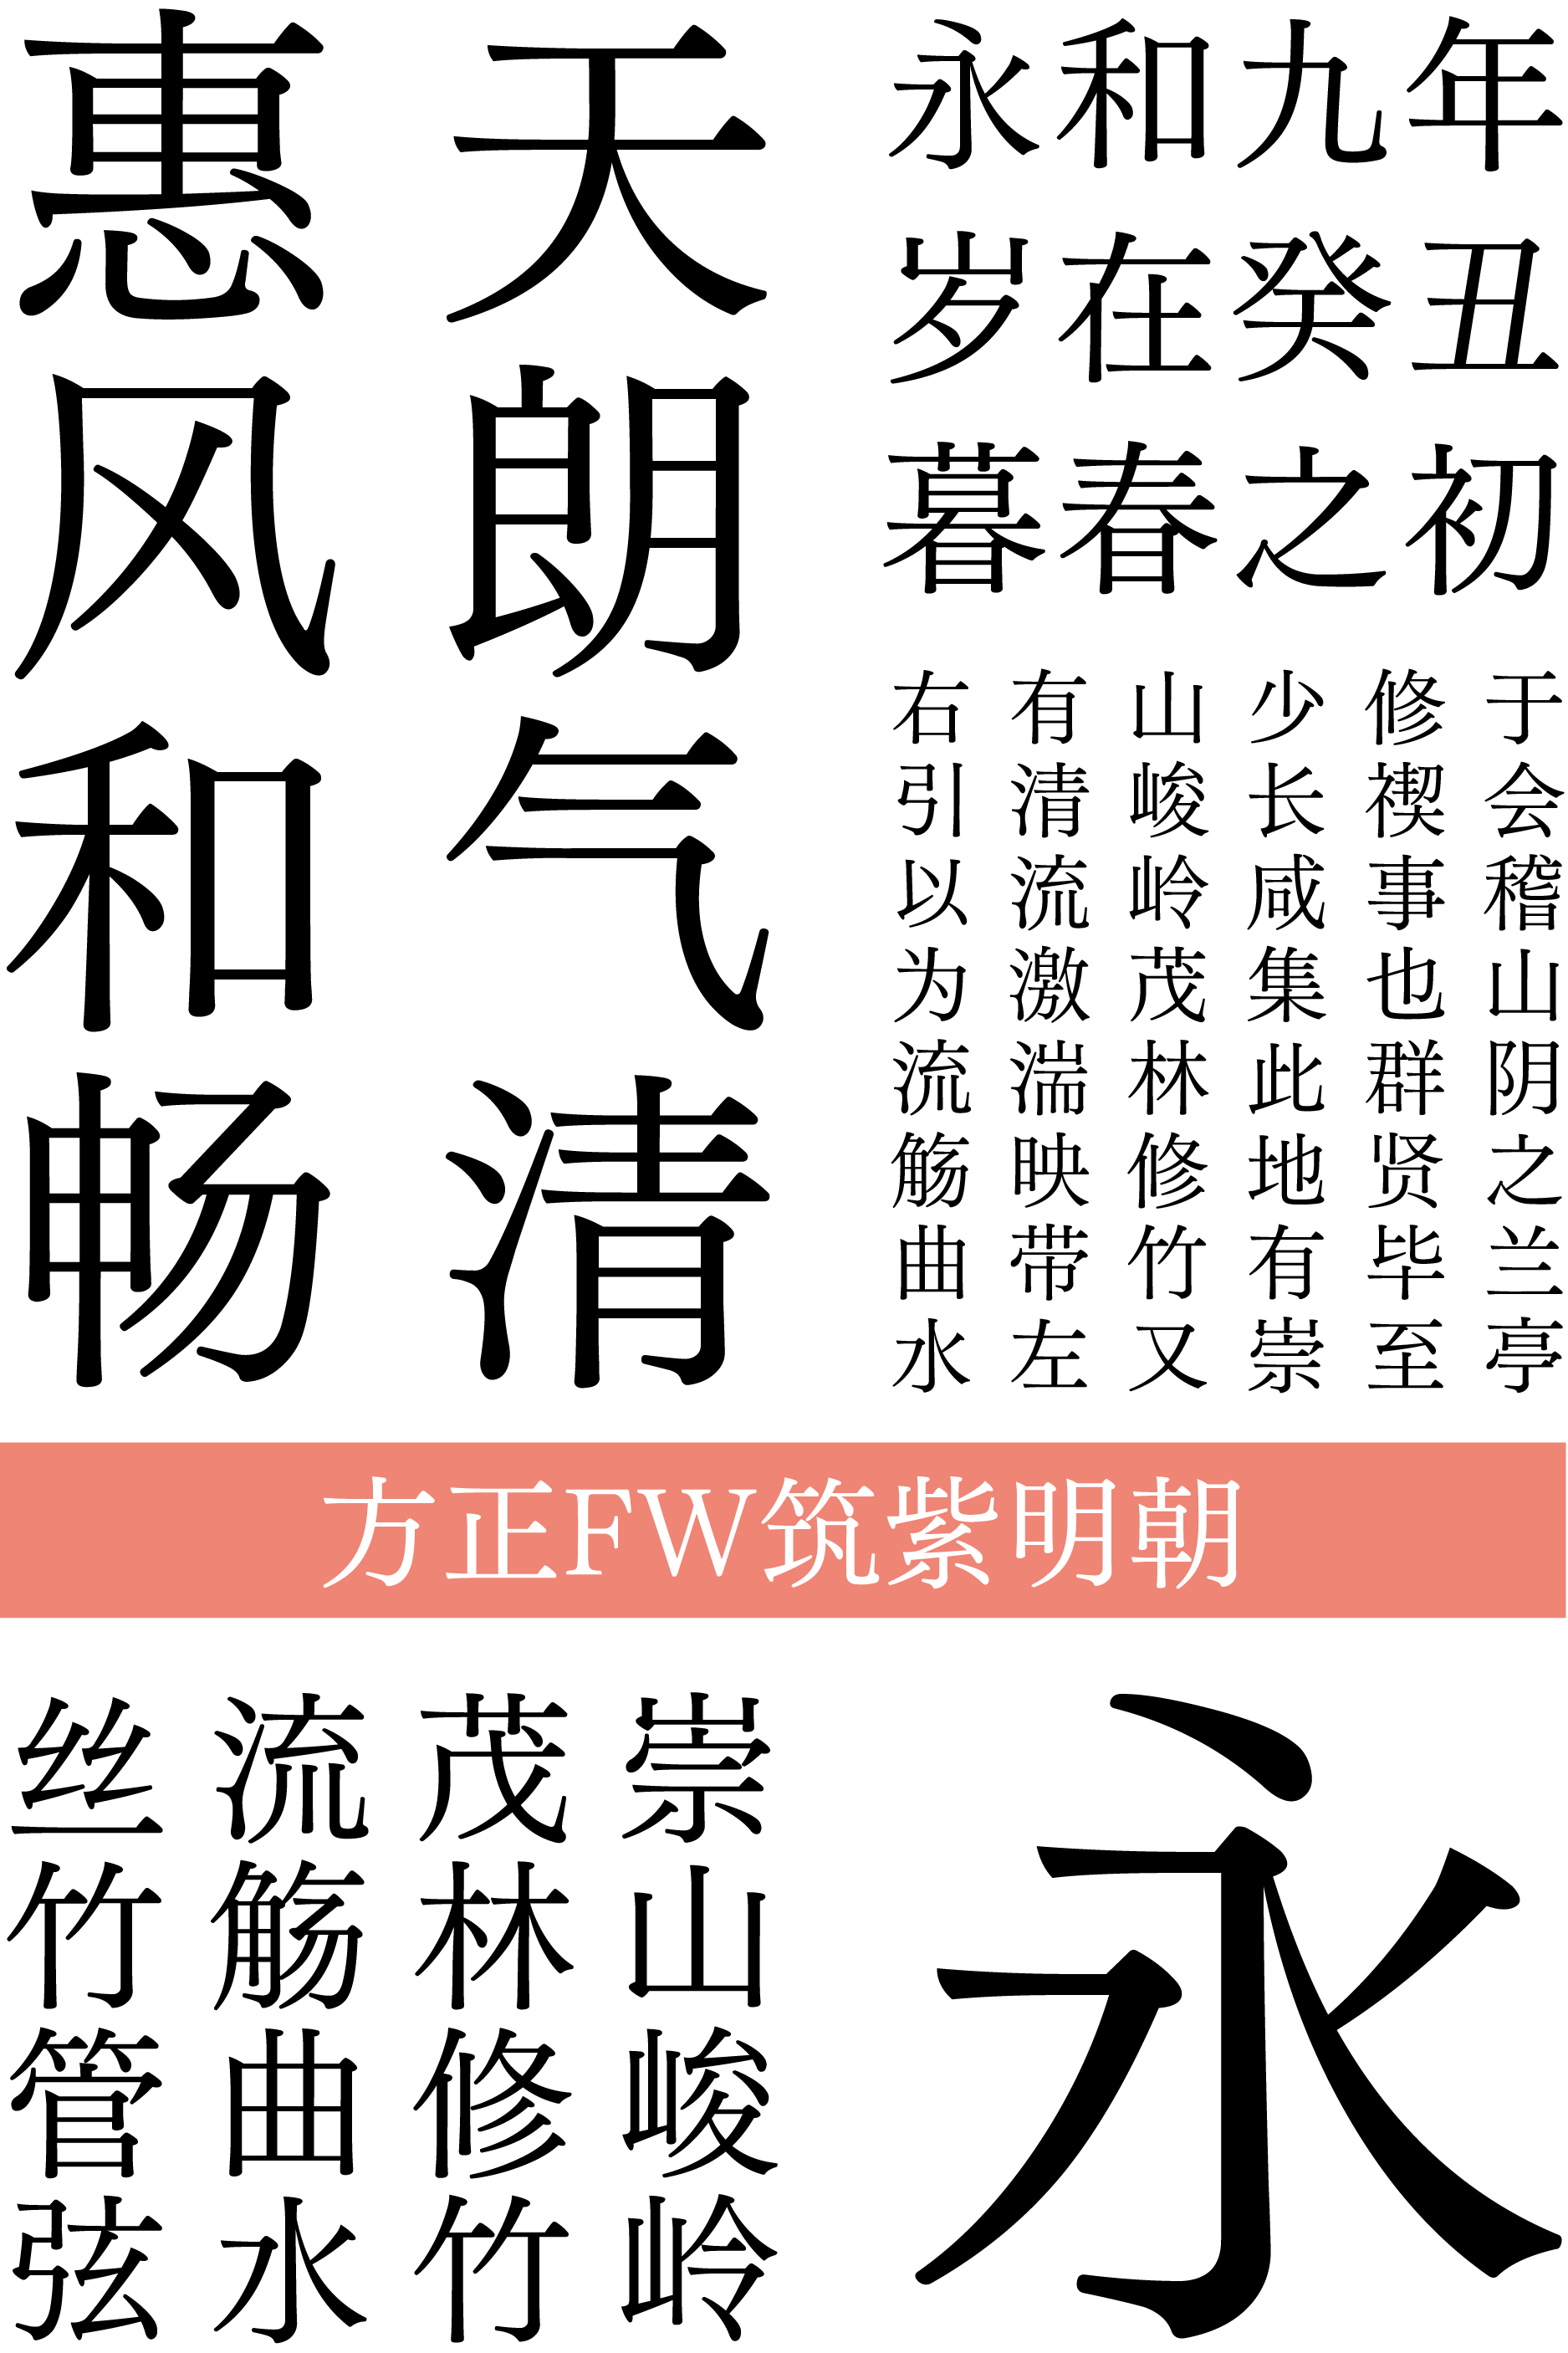 According to the Chinese character specification, the development of Japanese character library is realized.